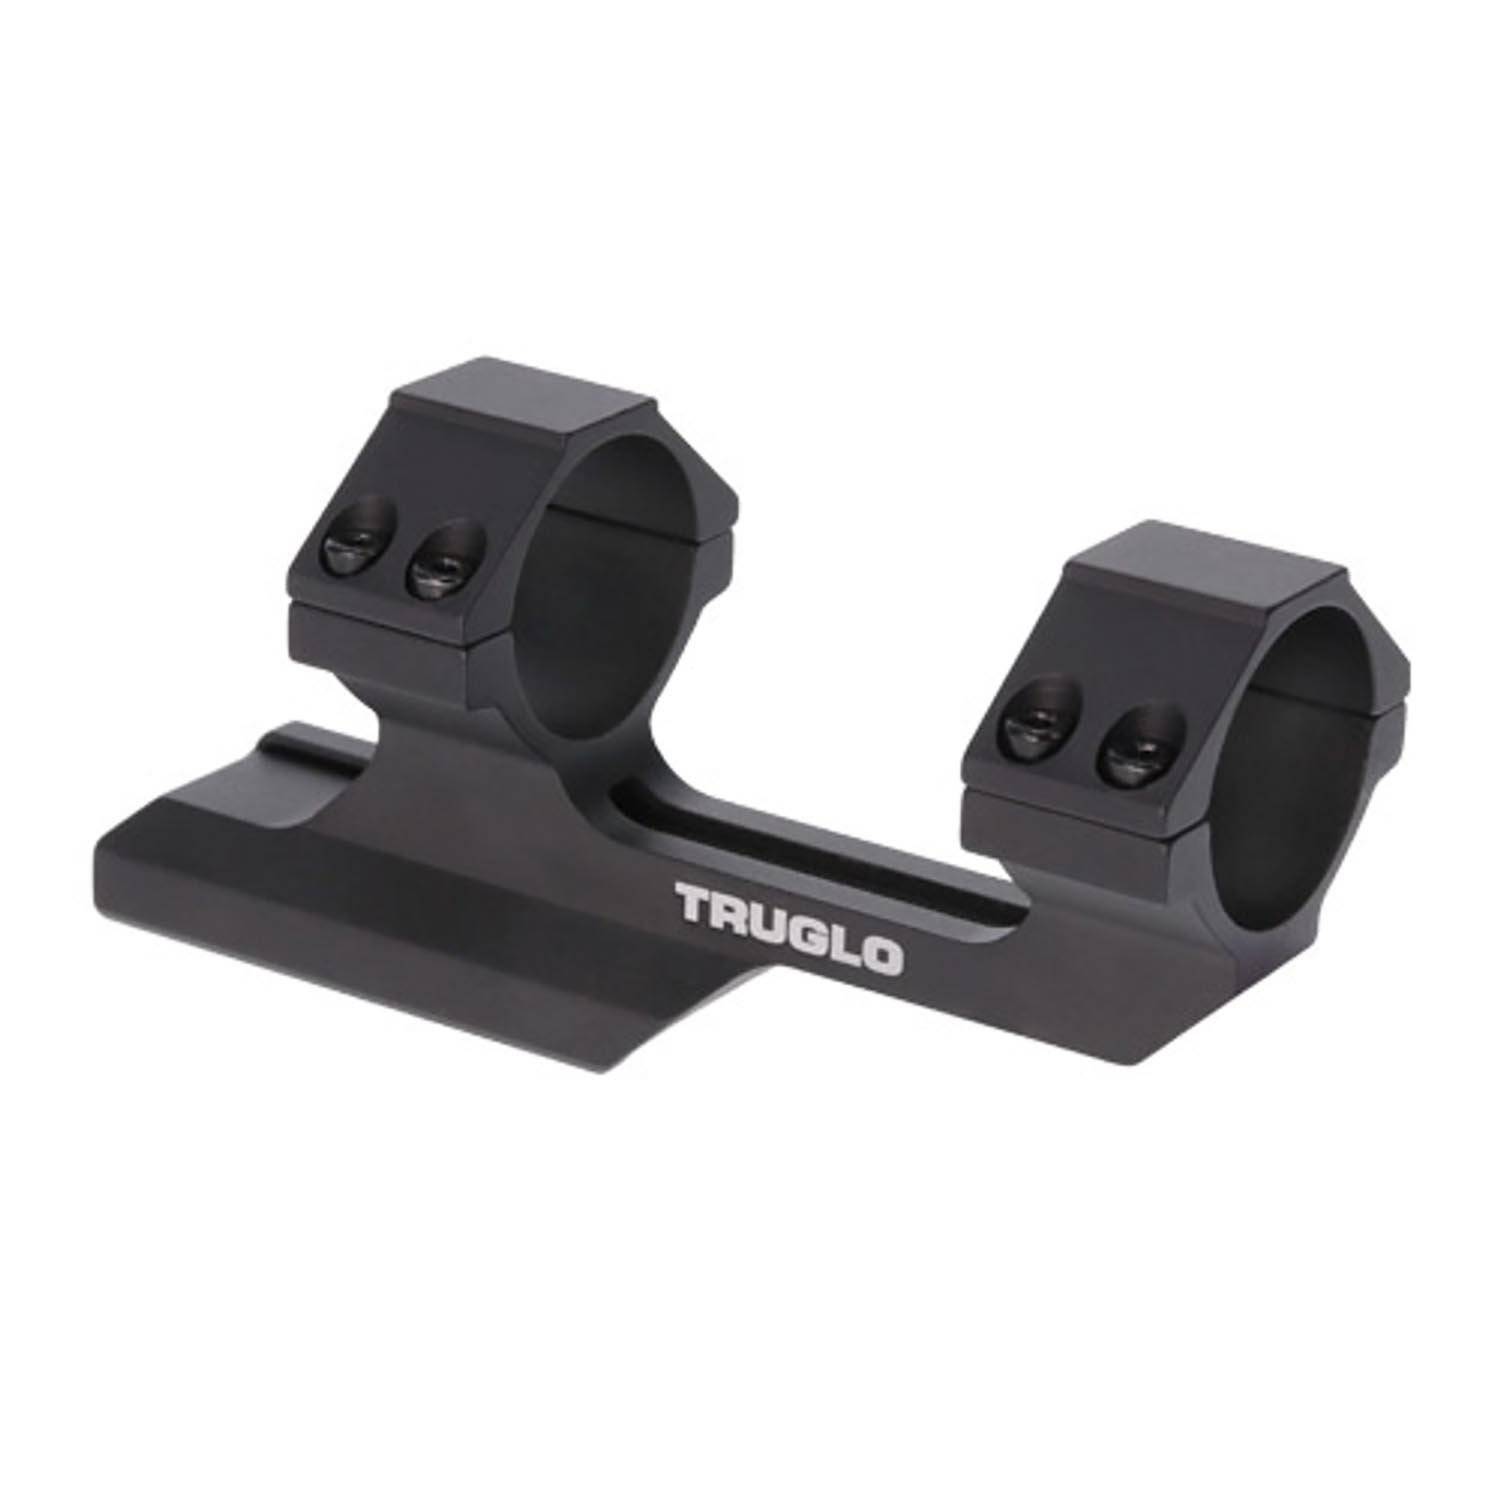 TruGlo Scope Mount for Tactical Rifle